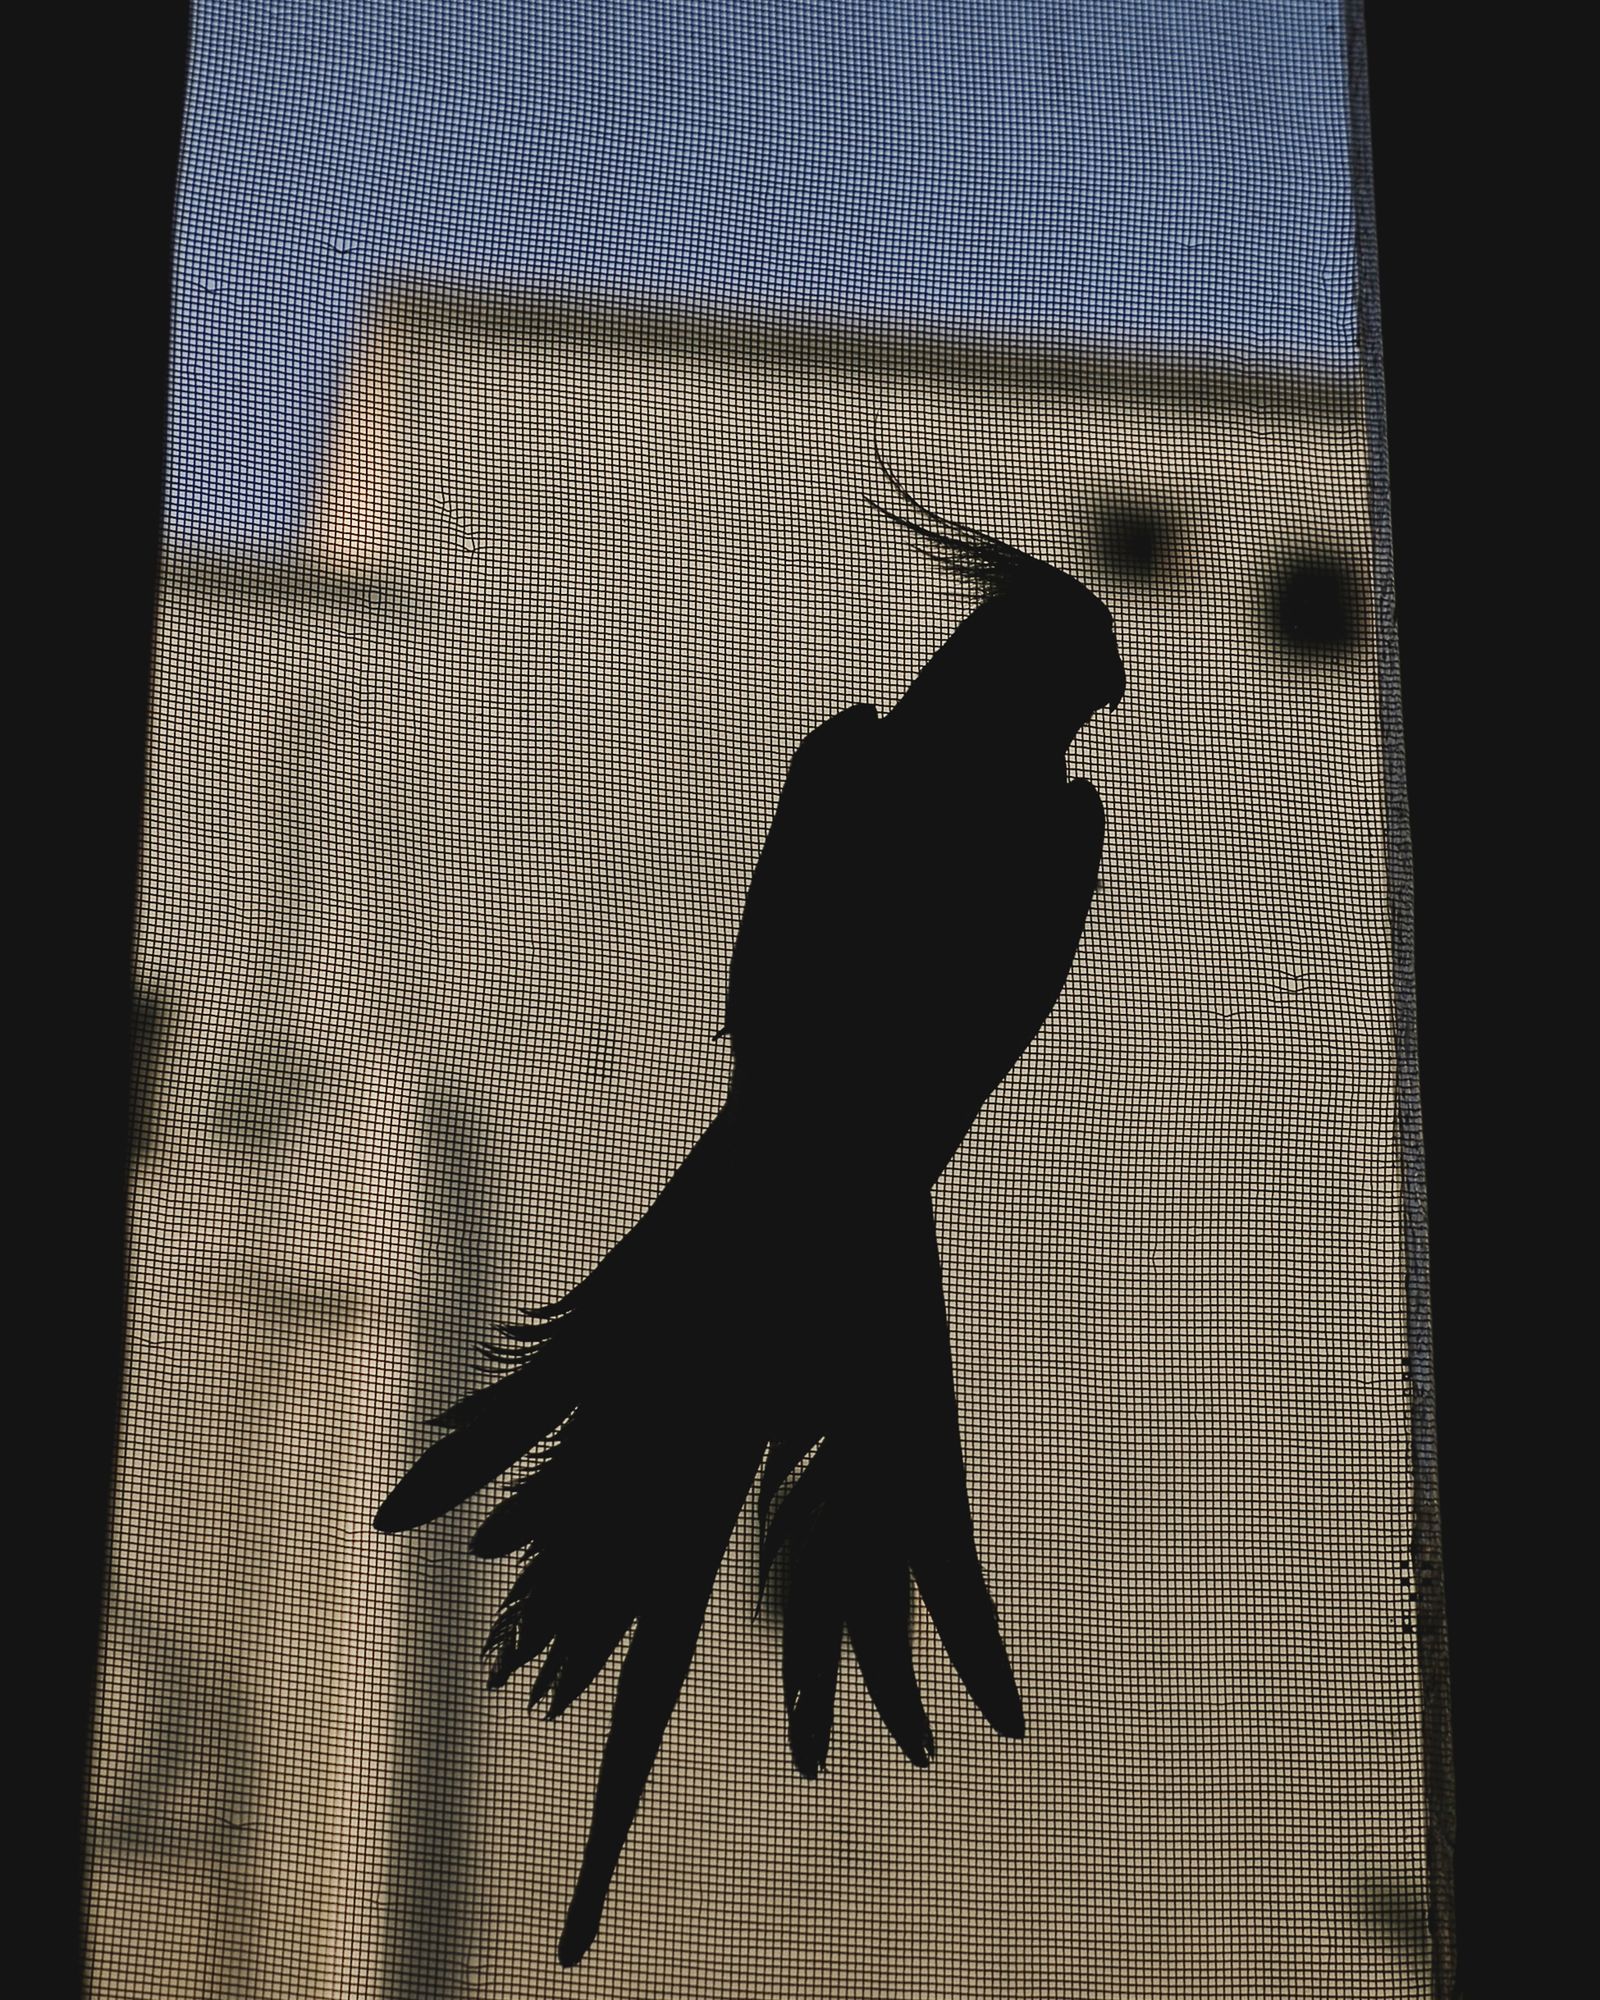 © Mahmoud Khattab - Image from the When Birds Sang Again photography project